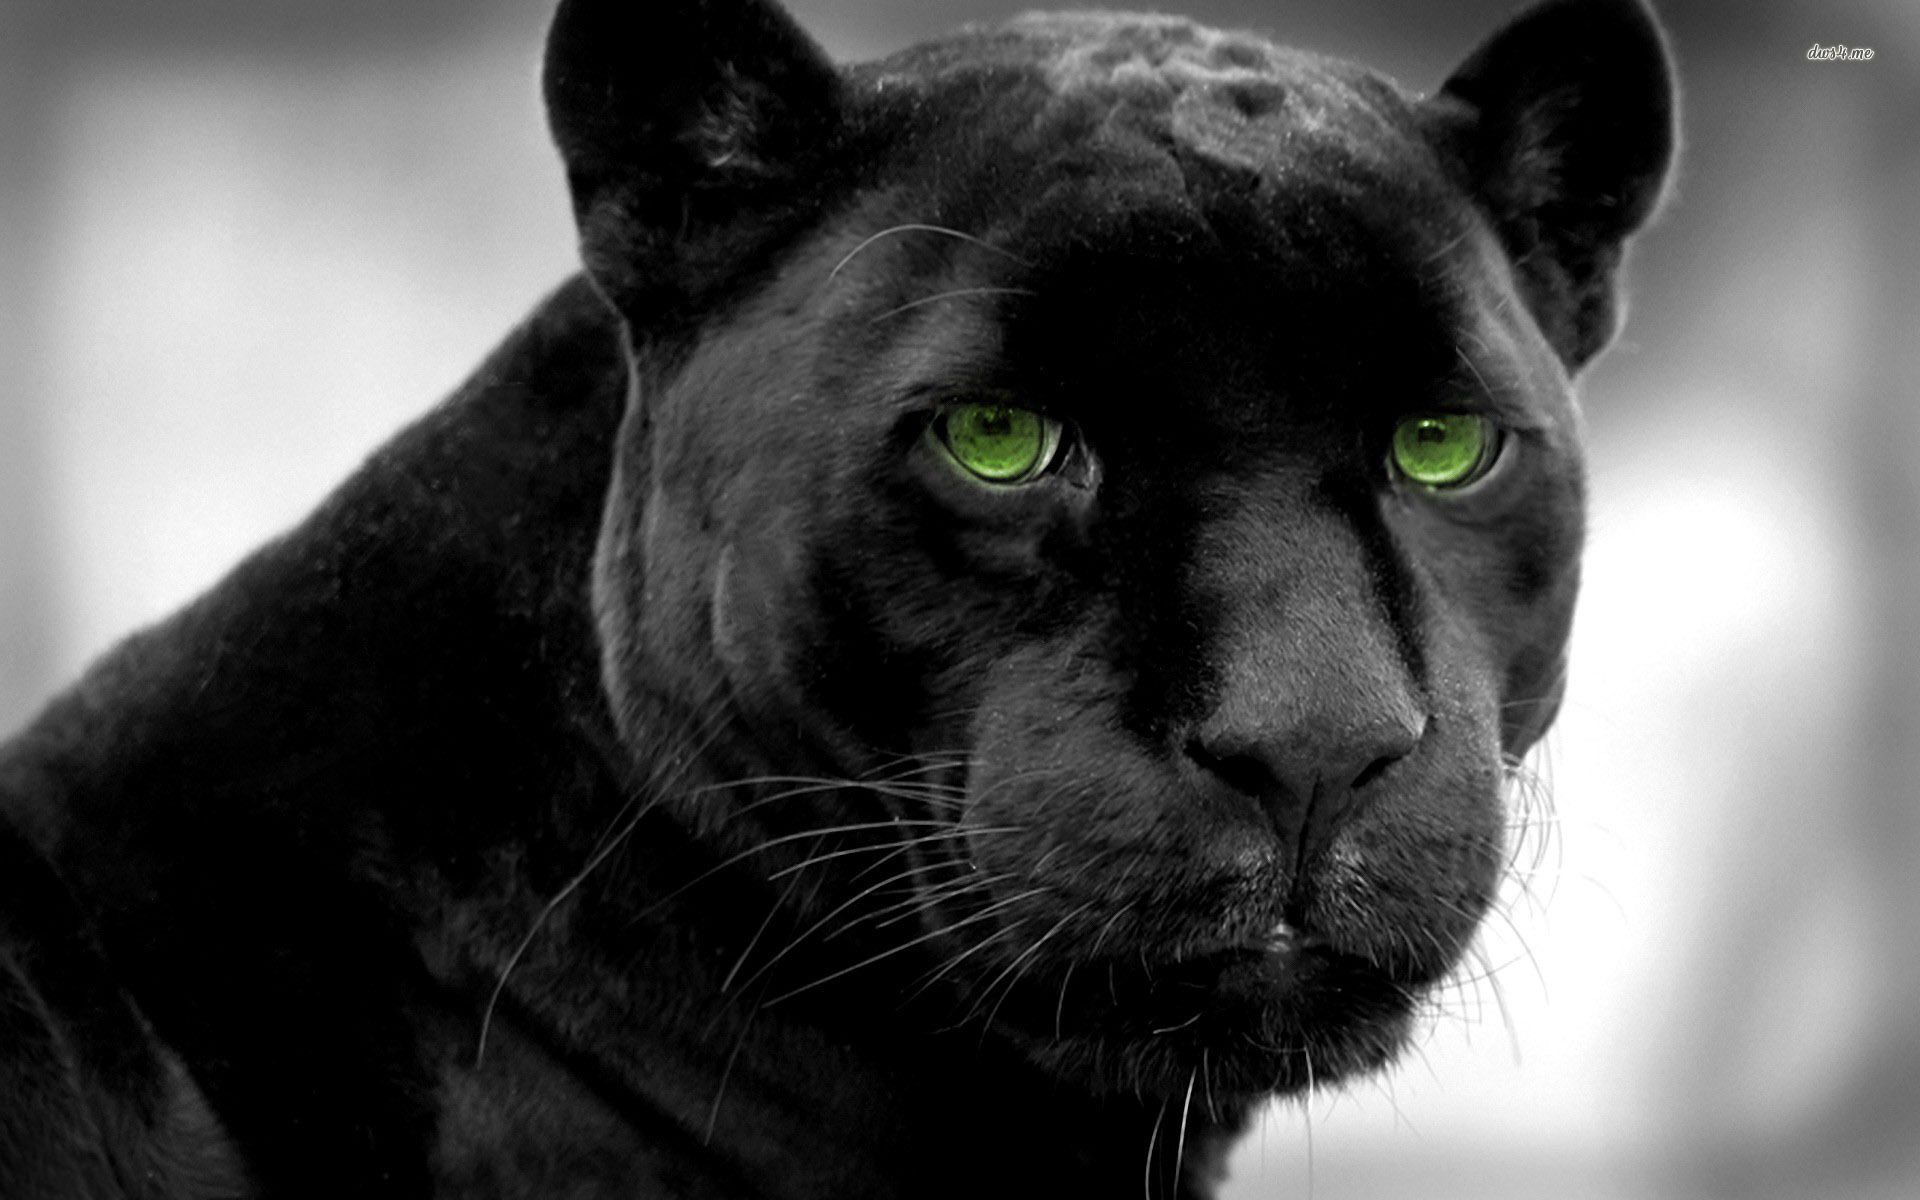 Black Panther Wallpaper Full HD Search Wild Life